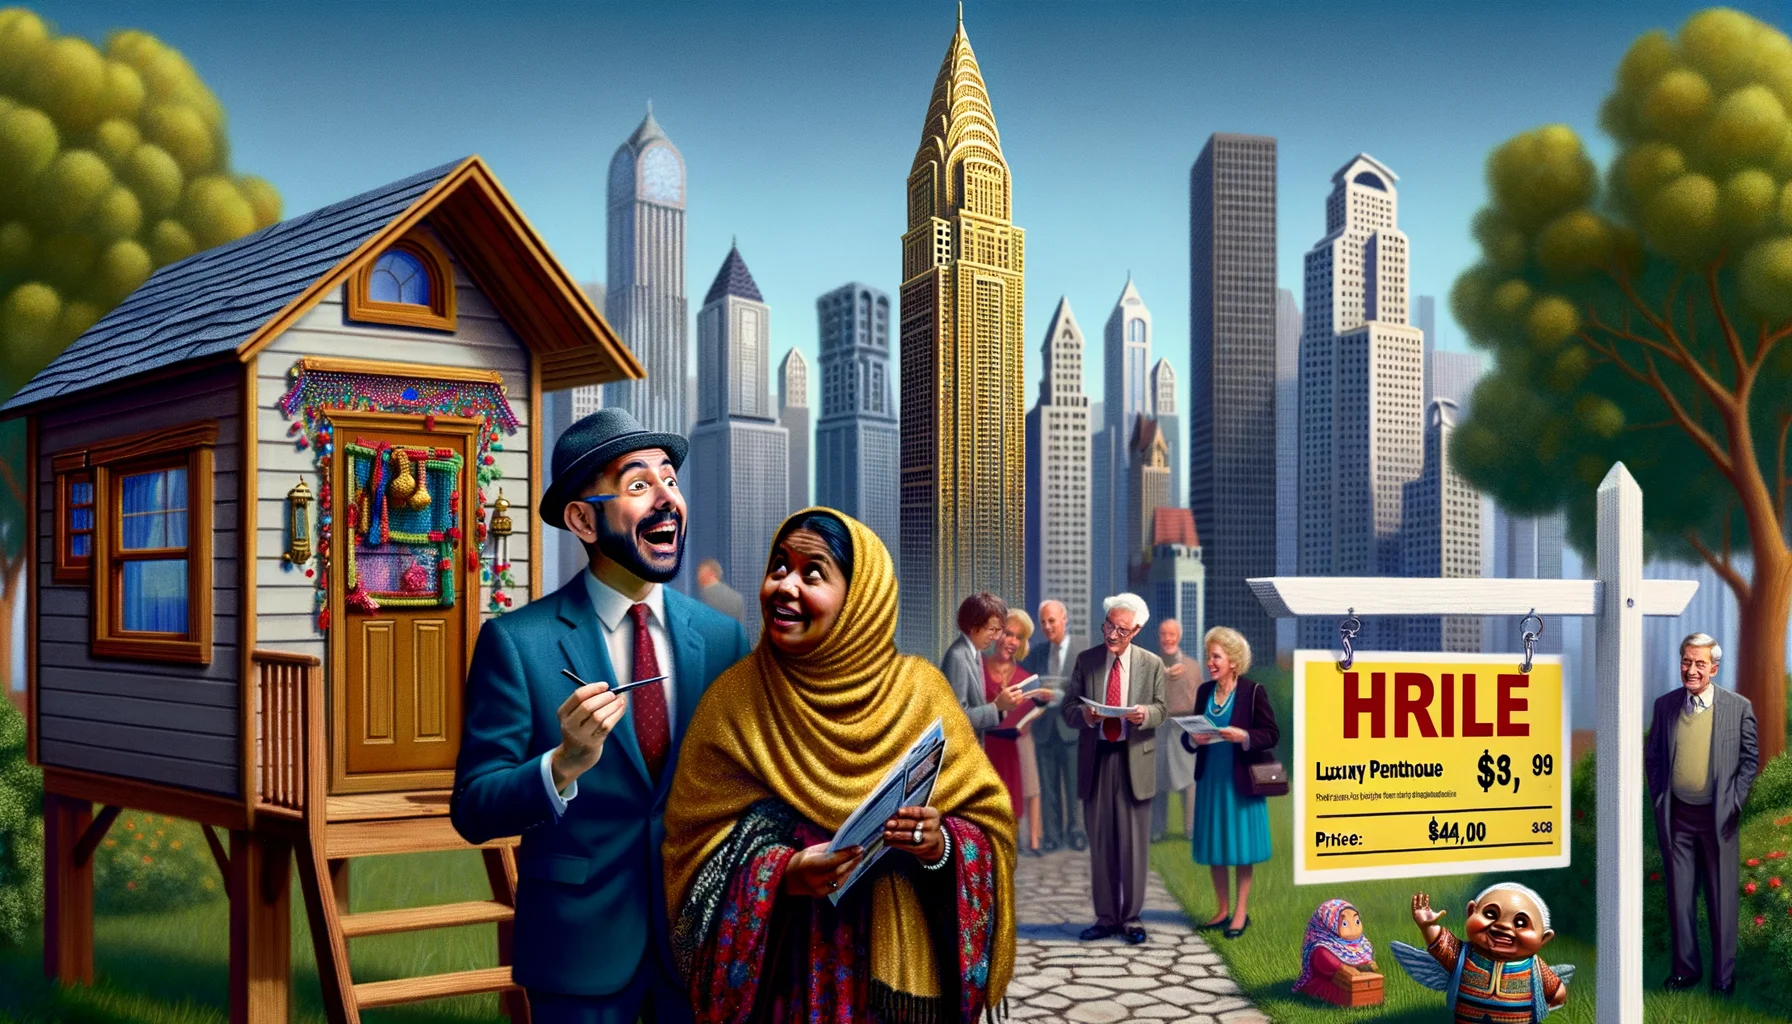 Generate a humorously exaggerated scene set at a bustling real estate open house. In the background, there's a skyscraper with a ridiculously high price tag hanging from it. A lady from a middle-eastern descent appearing rather shocked by the skyrocketing price is holding the tag. In the foreground, an over-enthusiastic real estate agent of Hispanic descent is cheerfully promoting a tiny shack labelled as 'luxury penthouse' to a bemused South Asian gentleman. For added humor, include subtle signs of ridiculous real estate trends – perhaps a garden gnome priced as 'premium outdoor art', or a birdhouse labelled as 'cozy studio apartment'.